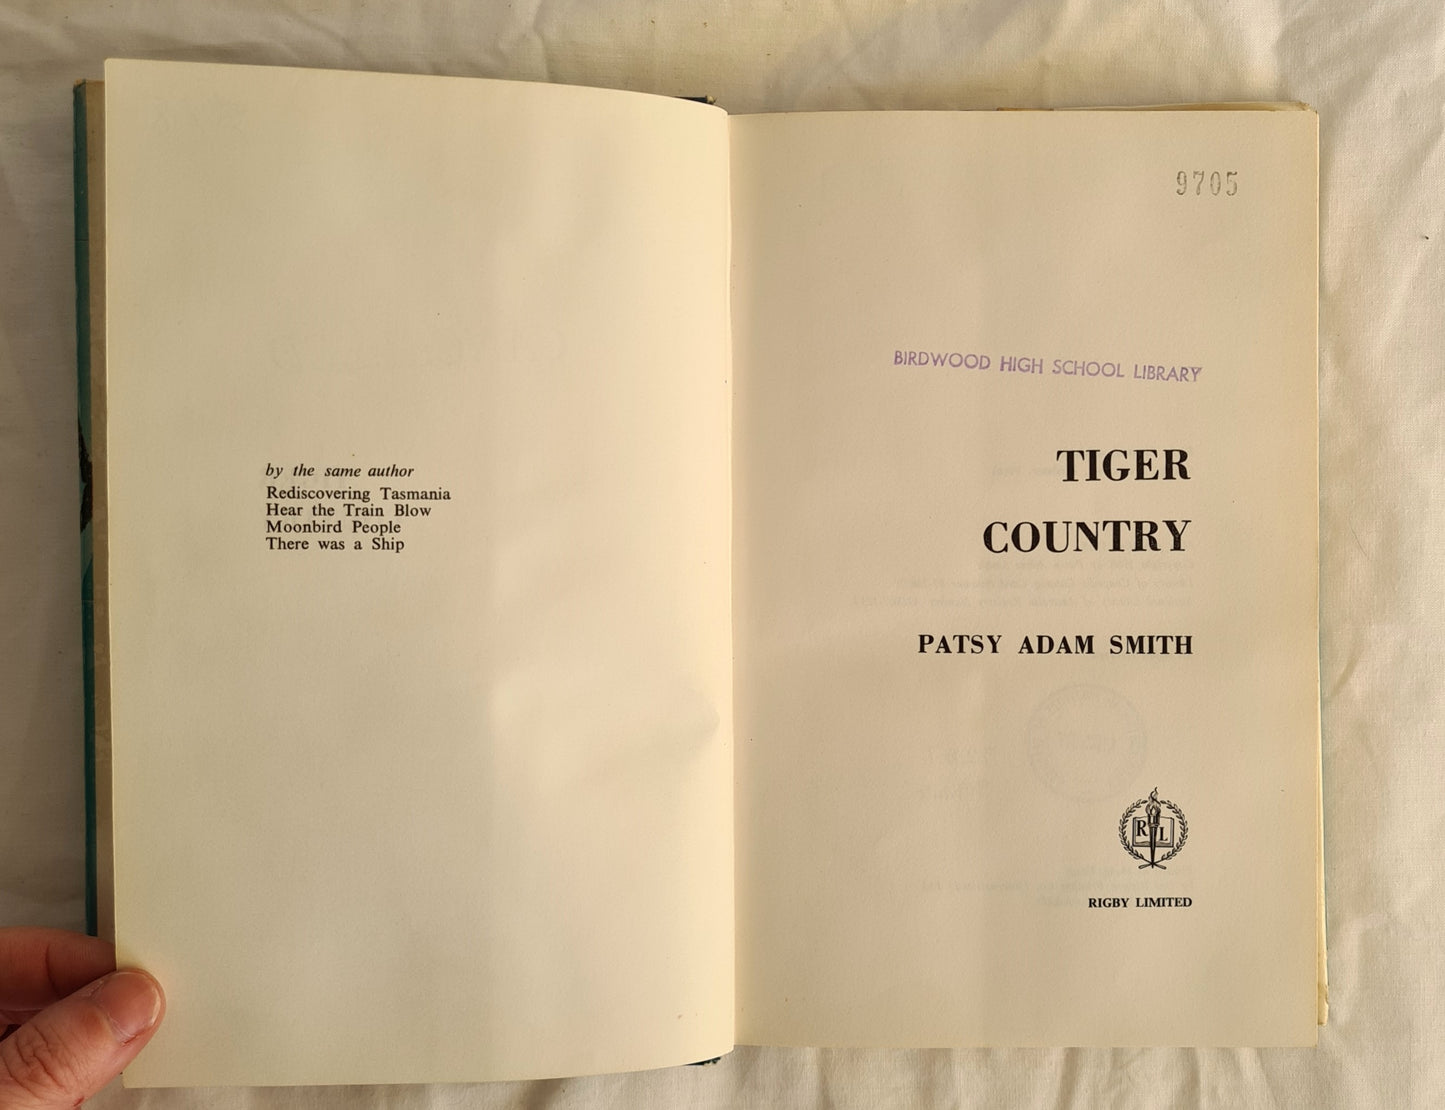 Tiger Country by Patsy Adam Smith